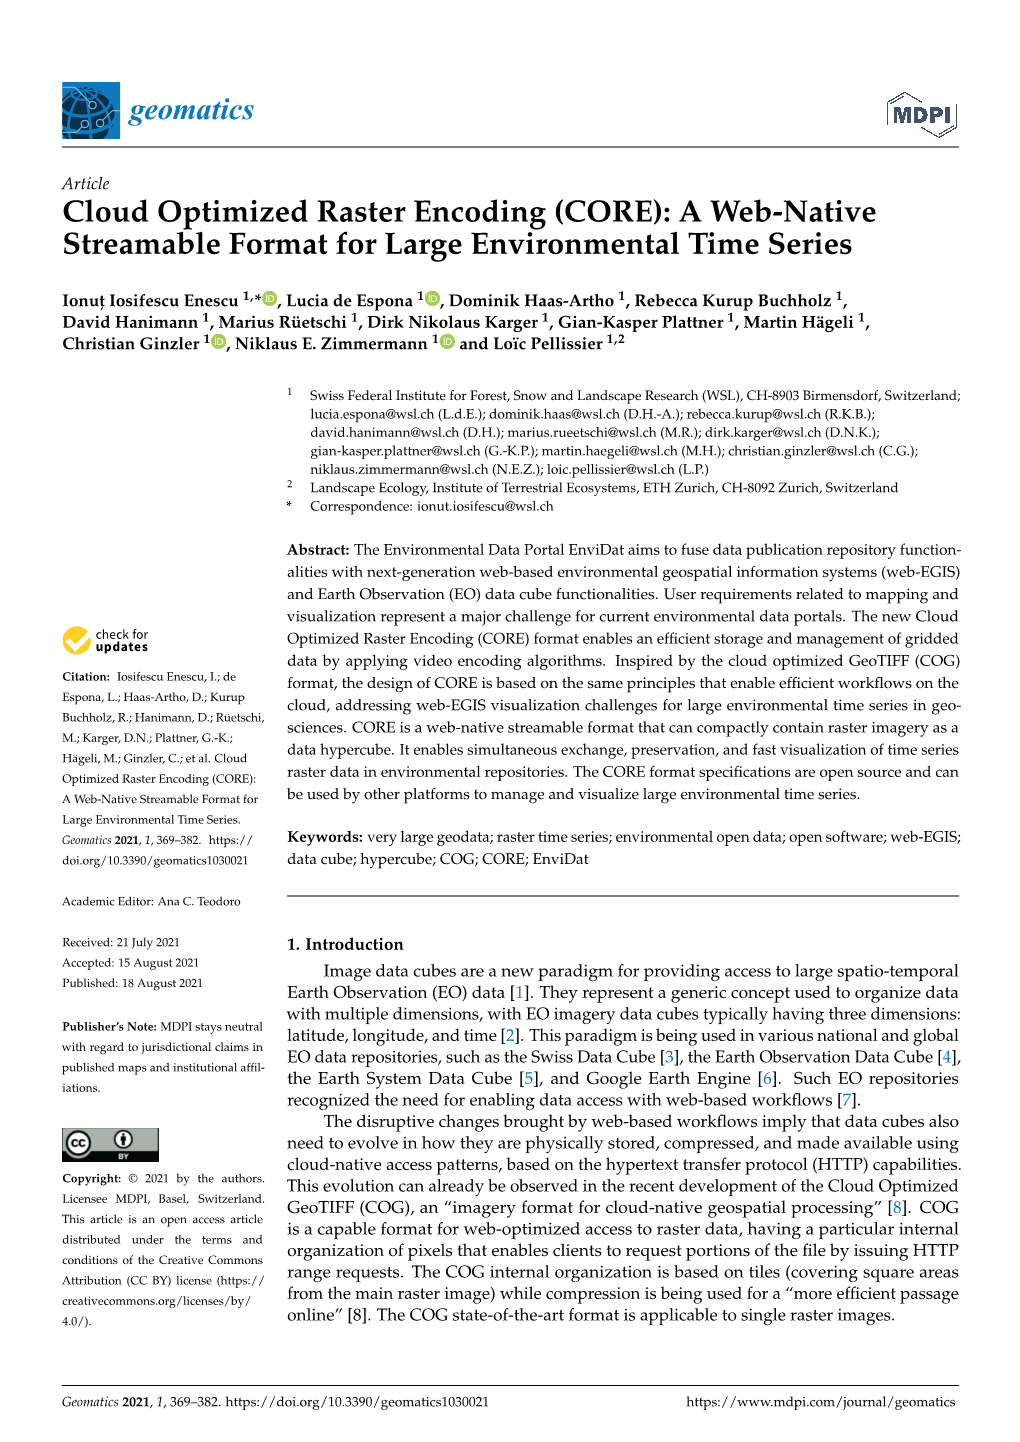 Cloud Optimized Raster Encoding (CORE): a Web-Native Streamable Format for Large Environmental Time Series